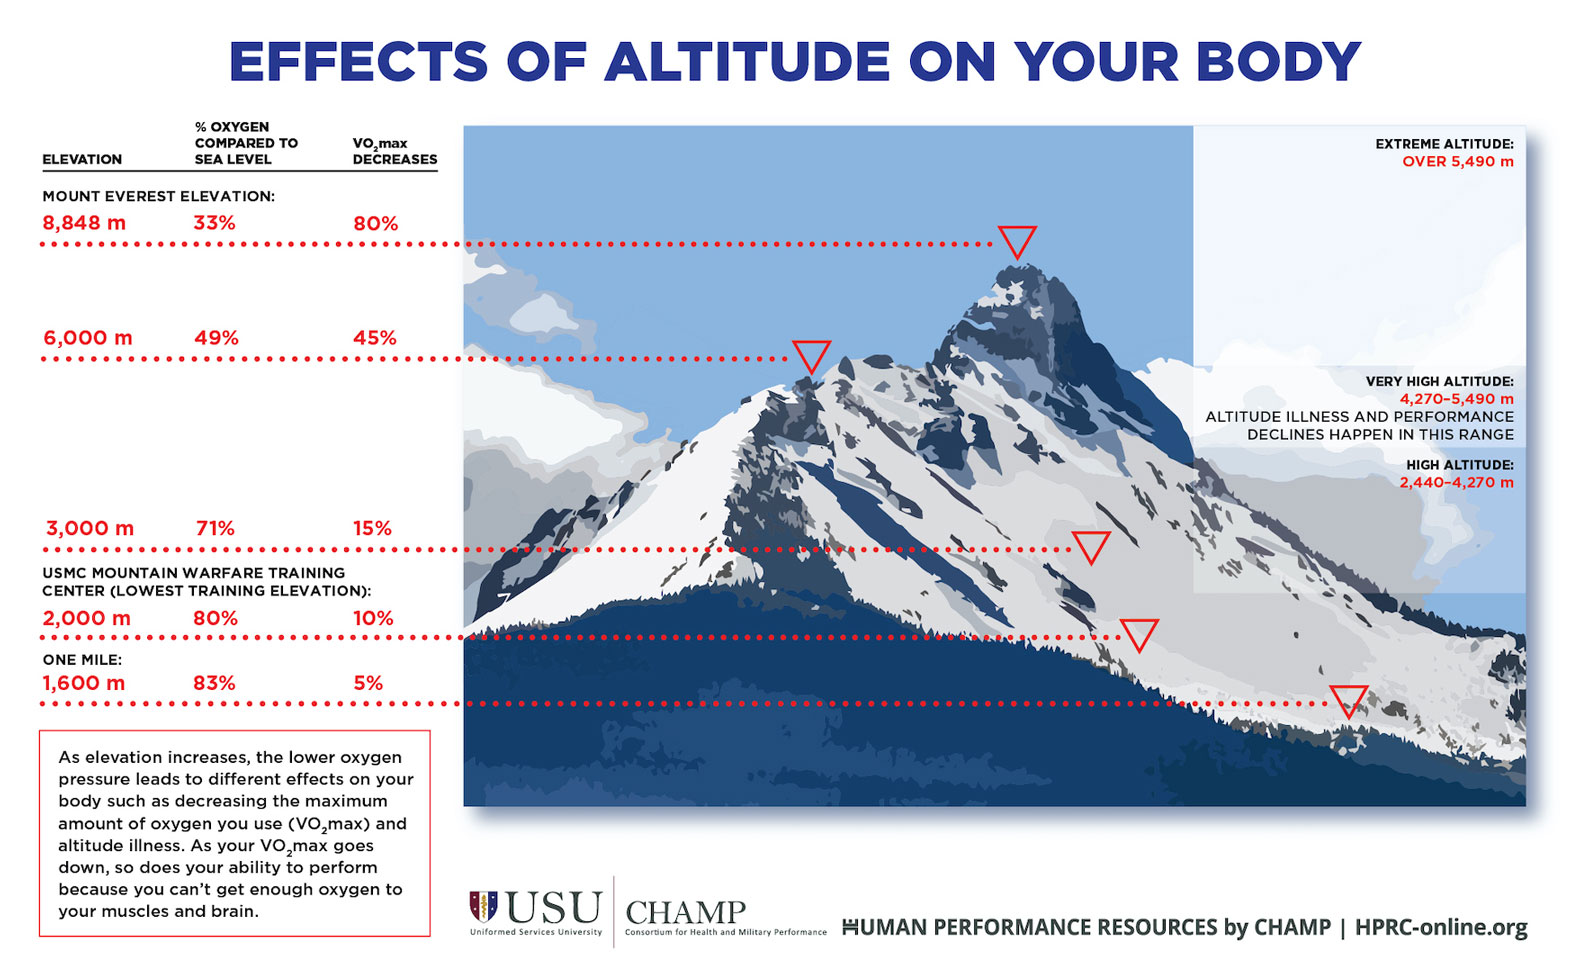 Effects of Altitude on Your Body As elevation increases, the lower oxygen pressure leads to different effects on your body such as decreasing the maximum amount of oxygen you use (VO2max) and altitude illness. As your VO2max goes down, so does your ability to perform because you can’t get enough oxygen to your muscles and brain.  Extreme altitude is over 5,490 meters. The elevation of Mount Everest is 8,848 meters. The percentage of oxygen compared to sea level is 33%, and the VO2 max decreases by 80%. For a mountain elevation of 6,000 meters, the percentage of oxygen compared to sea level is 49%, and the VO2 max decreases by 45%.  Very high altitude is between 4,270 and 5,490 meters. Altitude illness and performance declines happen in this range.  High altitude is between 2,440 and 4,270 meters. For a mountain elevation of 3,000 meters, the percentage of oxygen compared to sea level is 71%, and the VO2 max decreases by 15%. The average elevation of Afghanistan is 1,885 meters. The percentage of oxygen compared to sea level is 81%, and the VO2max decreases by 7%. For a mountain elevation of 1 mile (or 1,600 meters), the percentage of oxygen compared to sea level is 83%, and the VO2 max decreases by 5%.